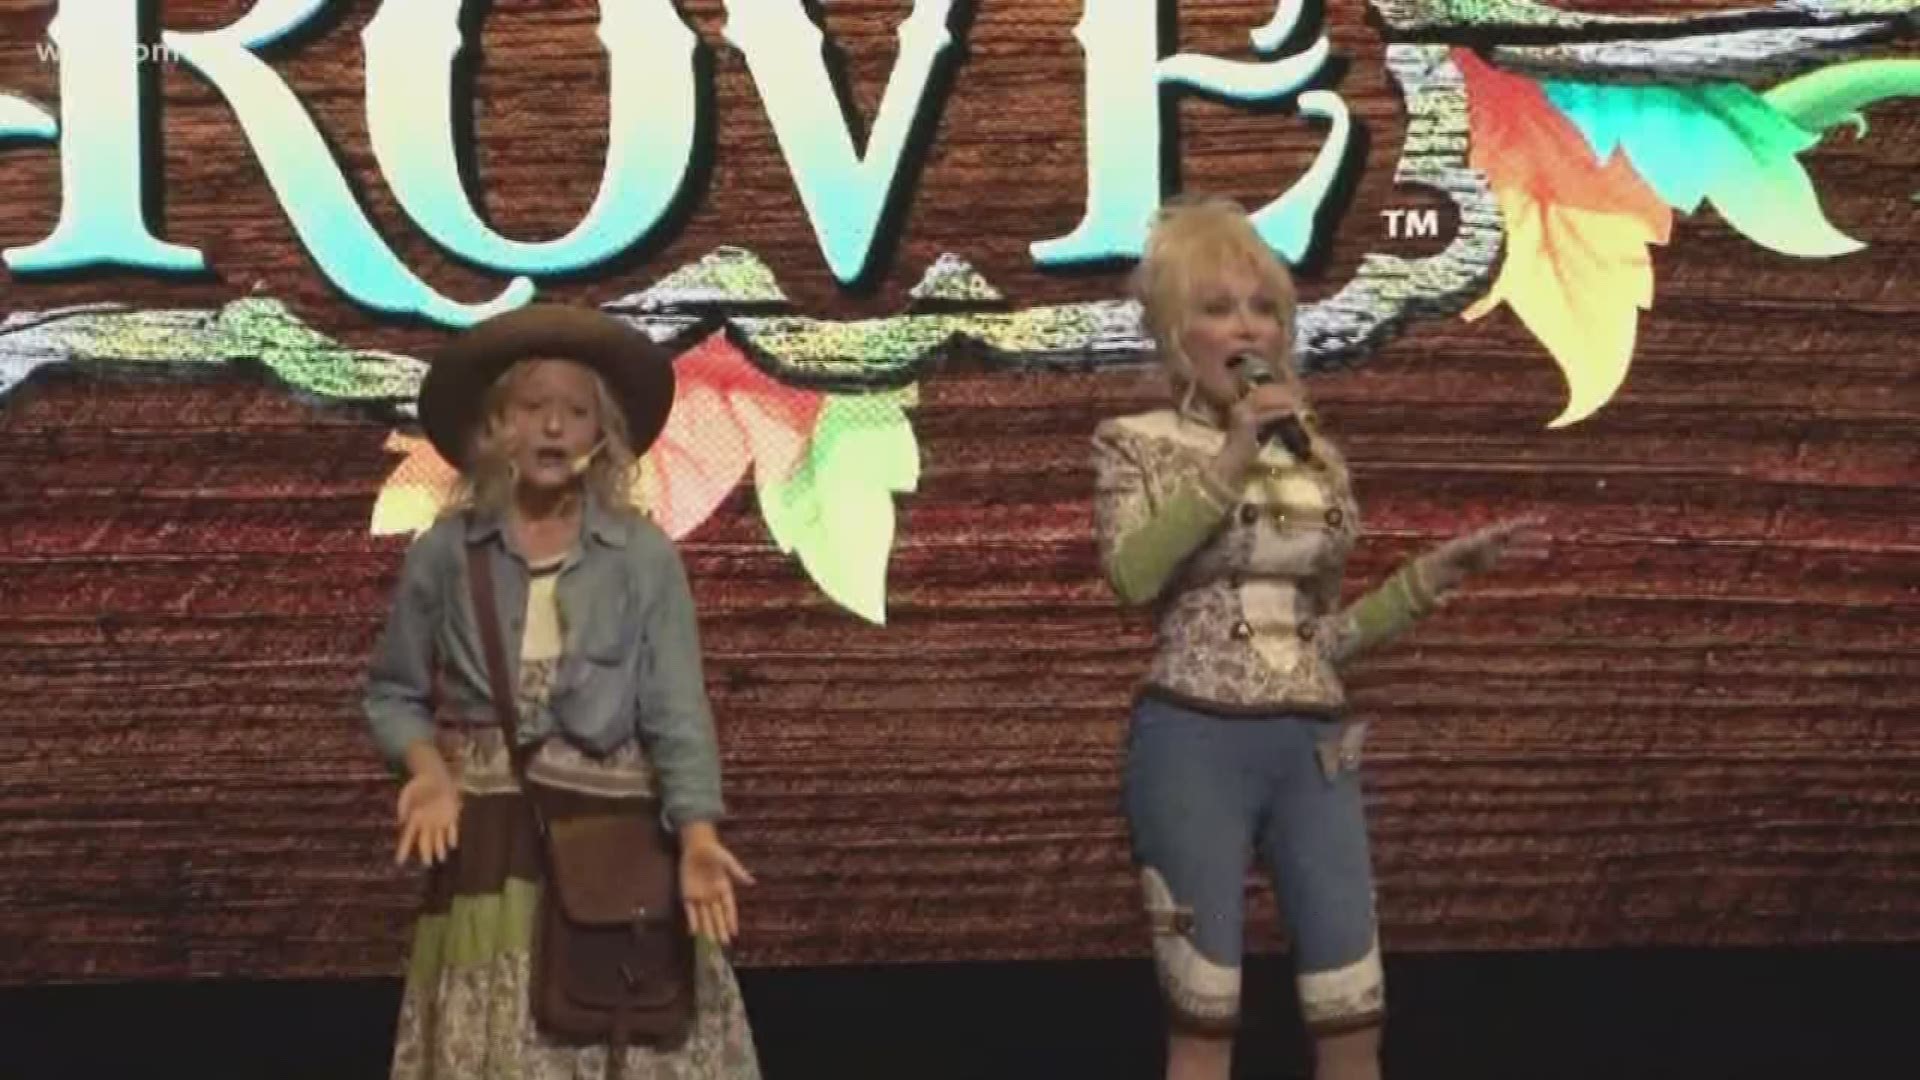 Dolly Parton makes it official -- announcing a major expansion project at Dollywood.